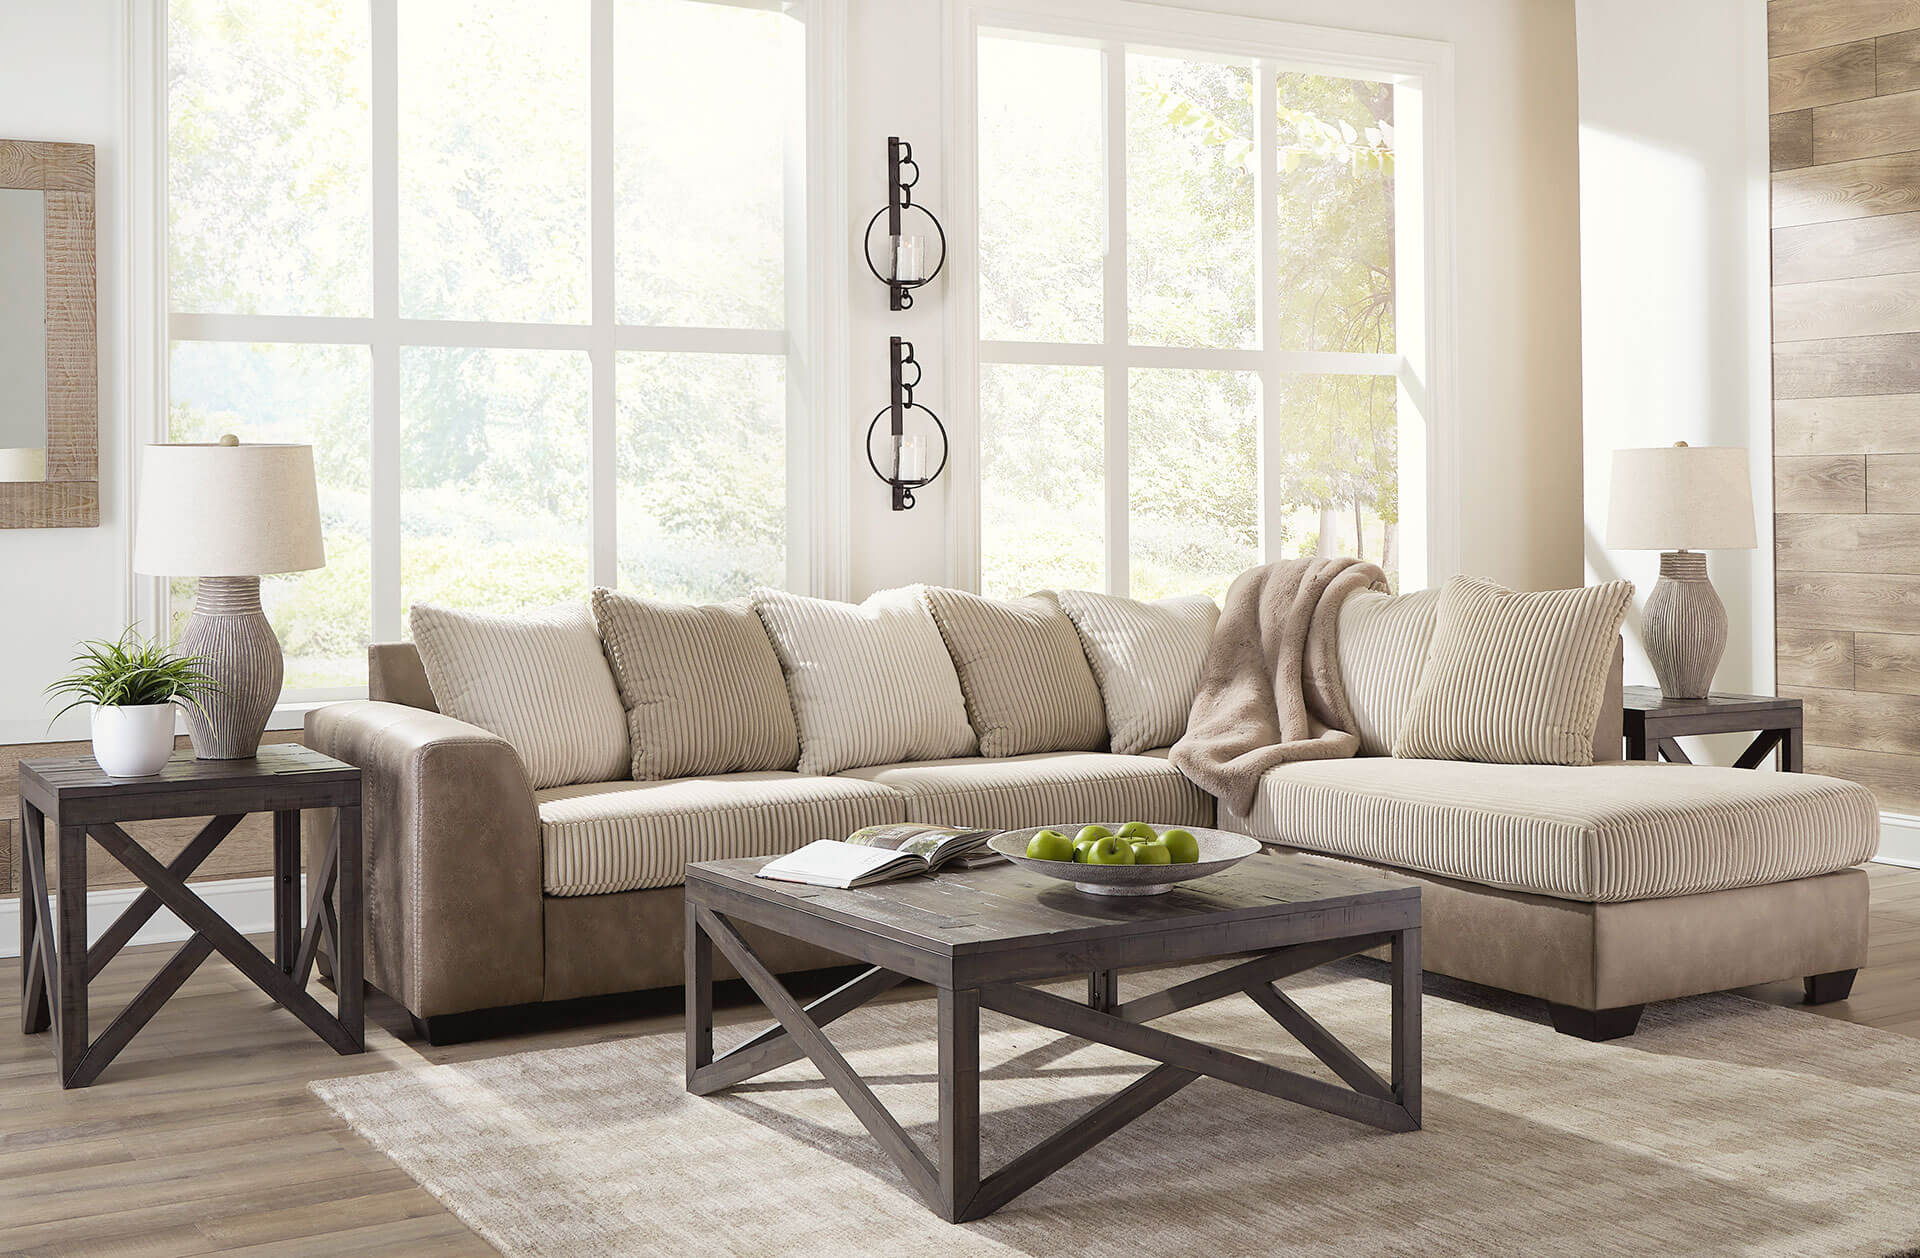 Ashley 18403S2 Keskin 2-Piece Sectional with Chaise